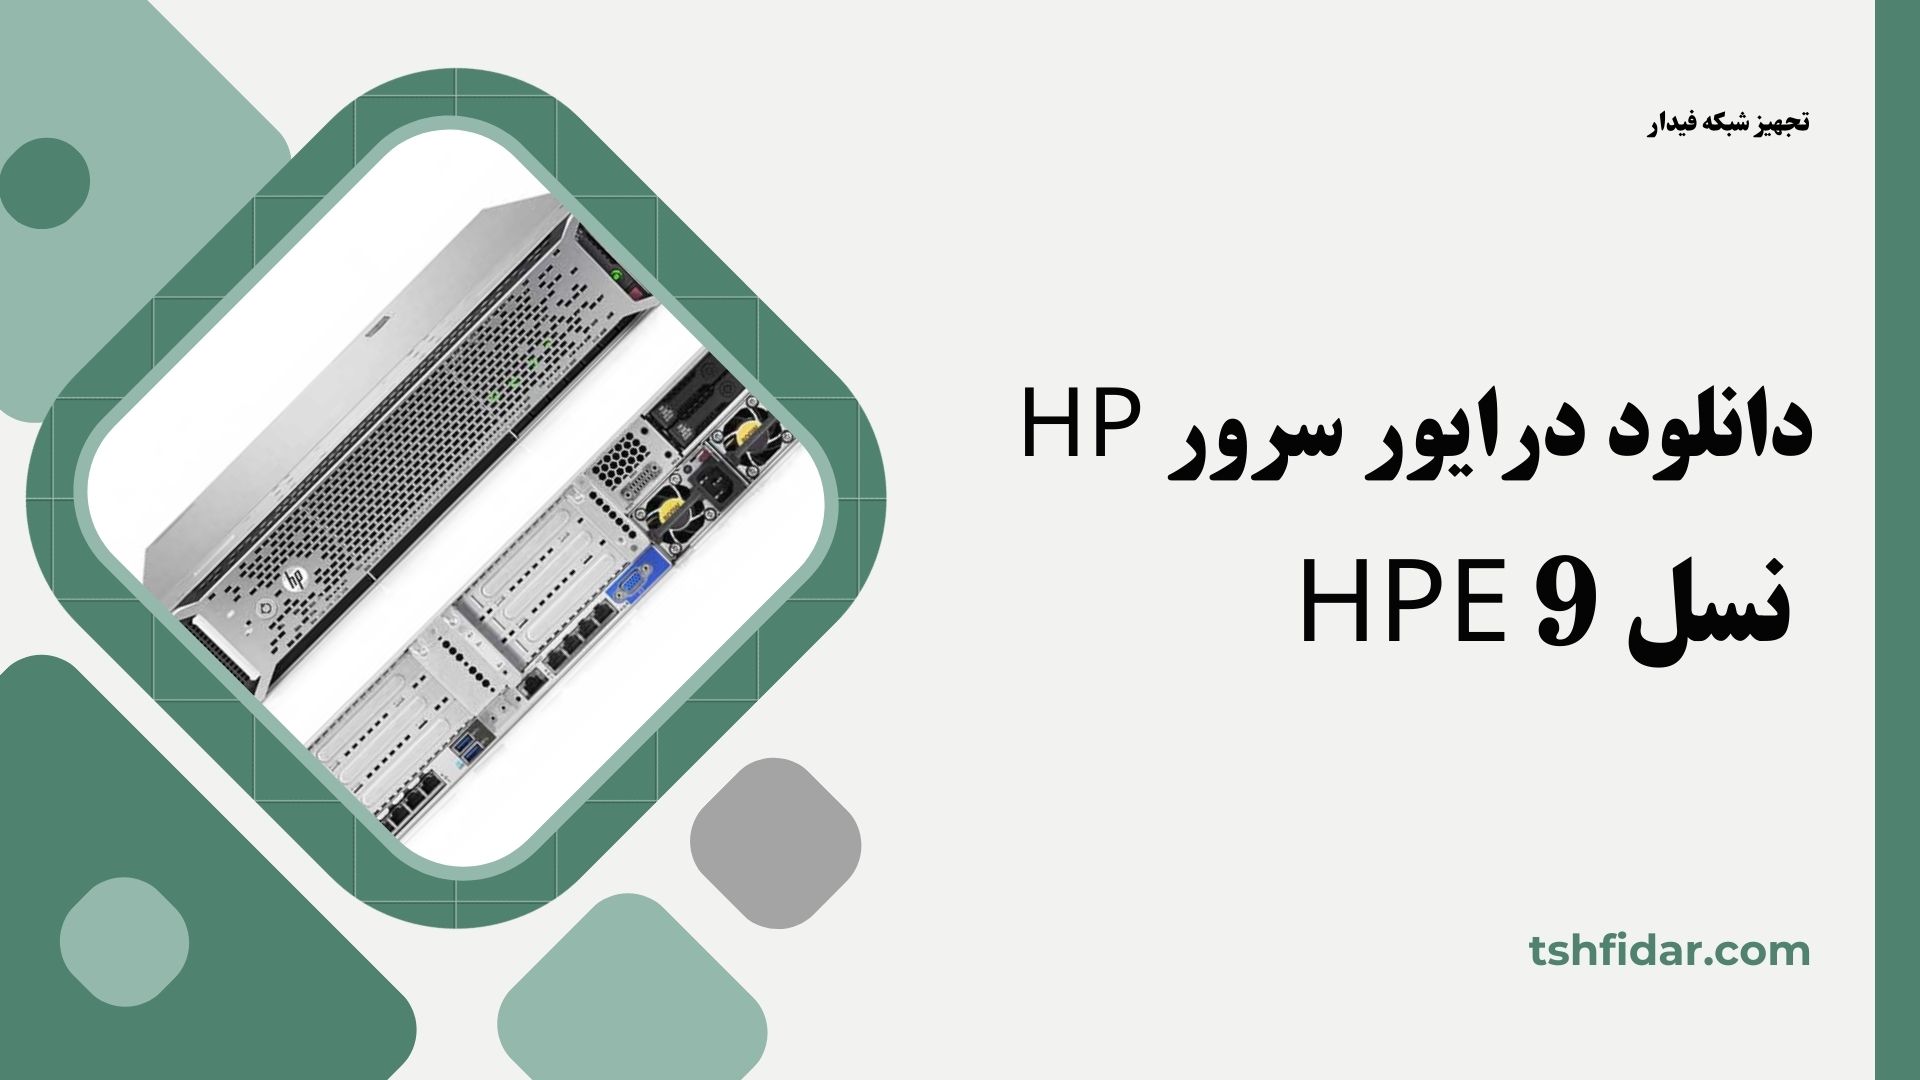 Download HP 9th Generation HPE server driver